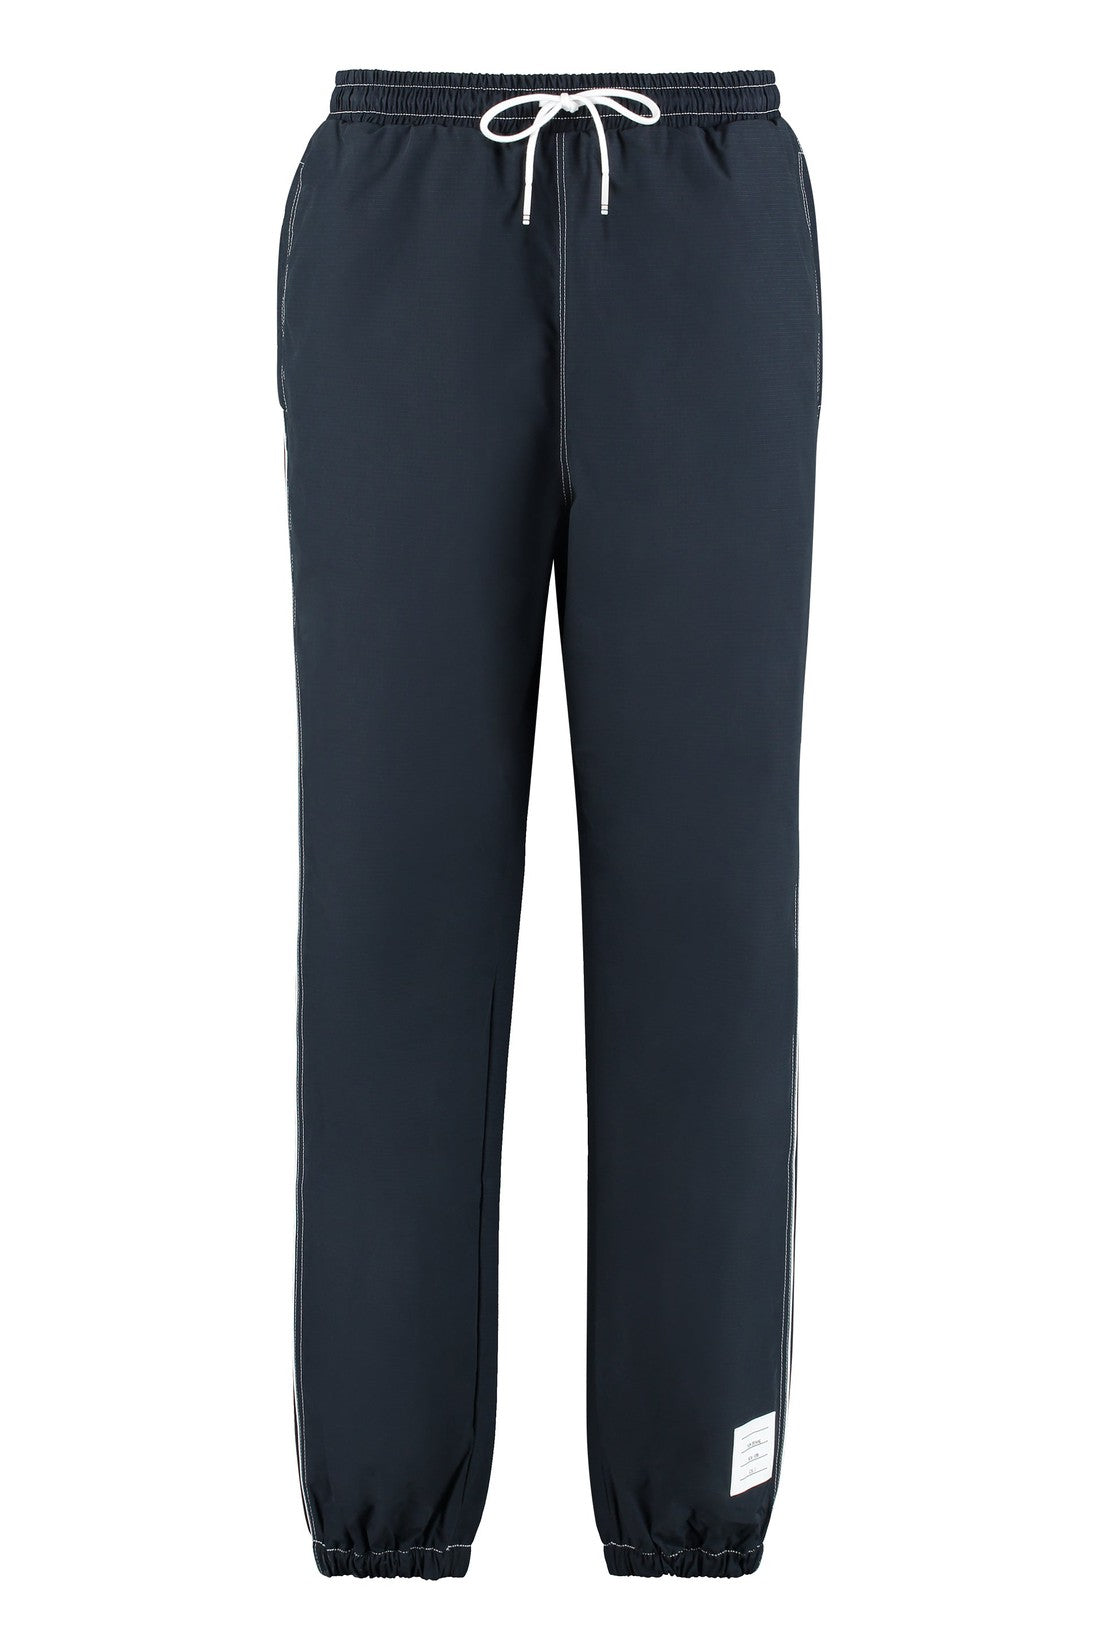 Thom Browne-OUTLET-SALE-Techno fabric track pants-ARCHIVIST